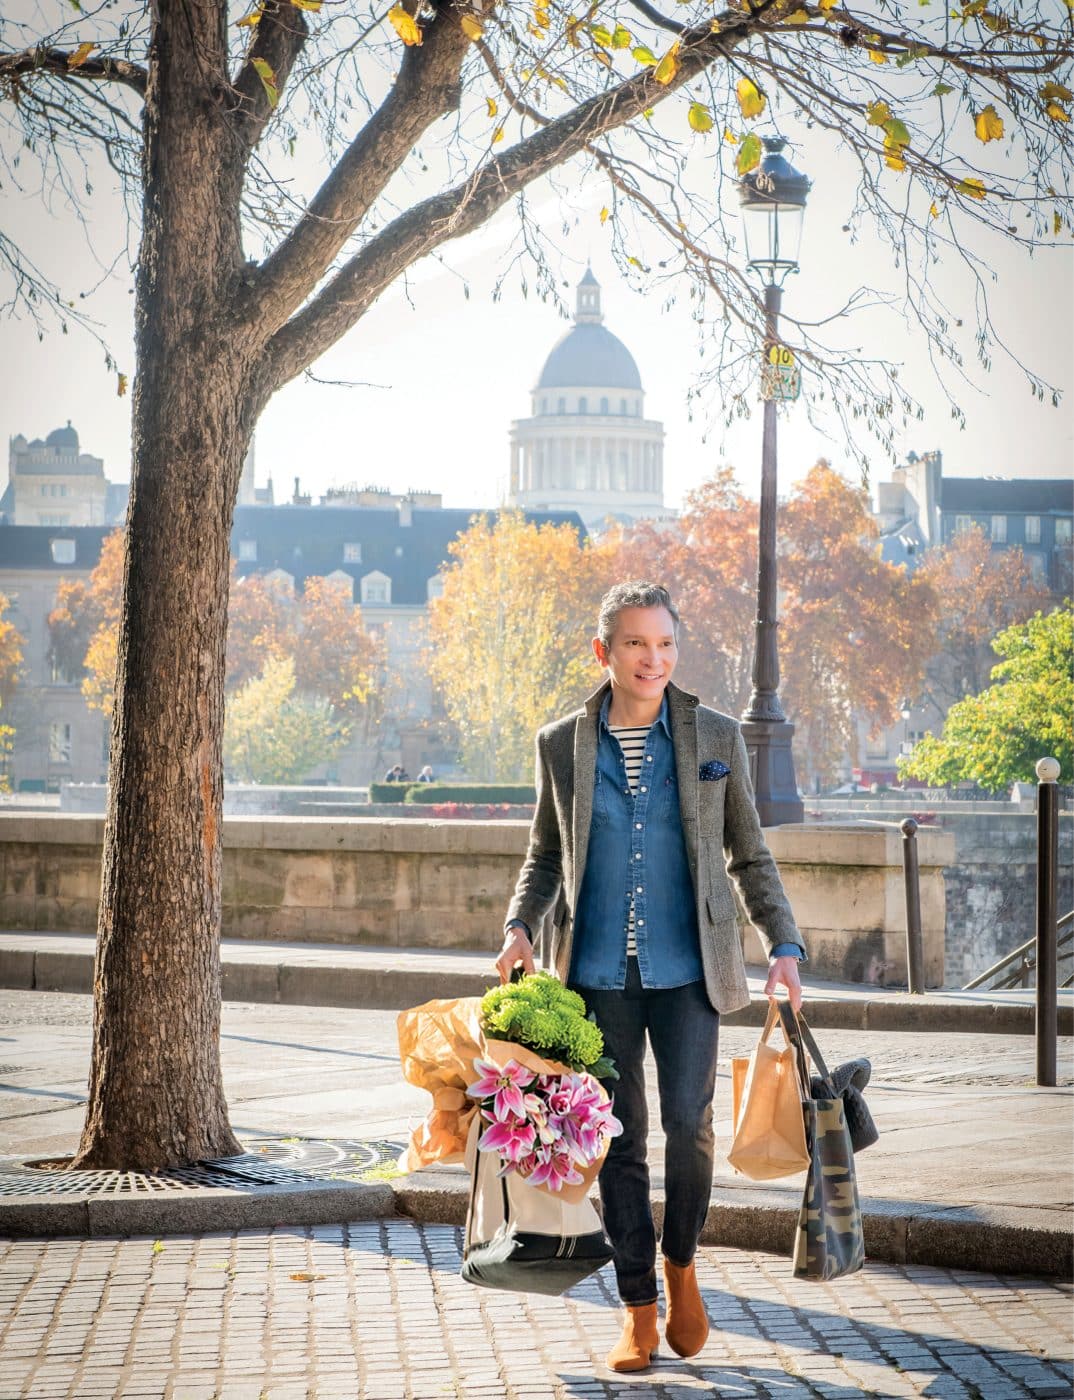 Interior designer David Jimenez portrait in Paris with tote full of market flowers from his book Parisian By Design published by Rizzoli